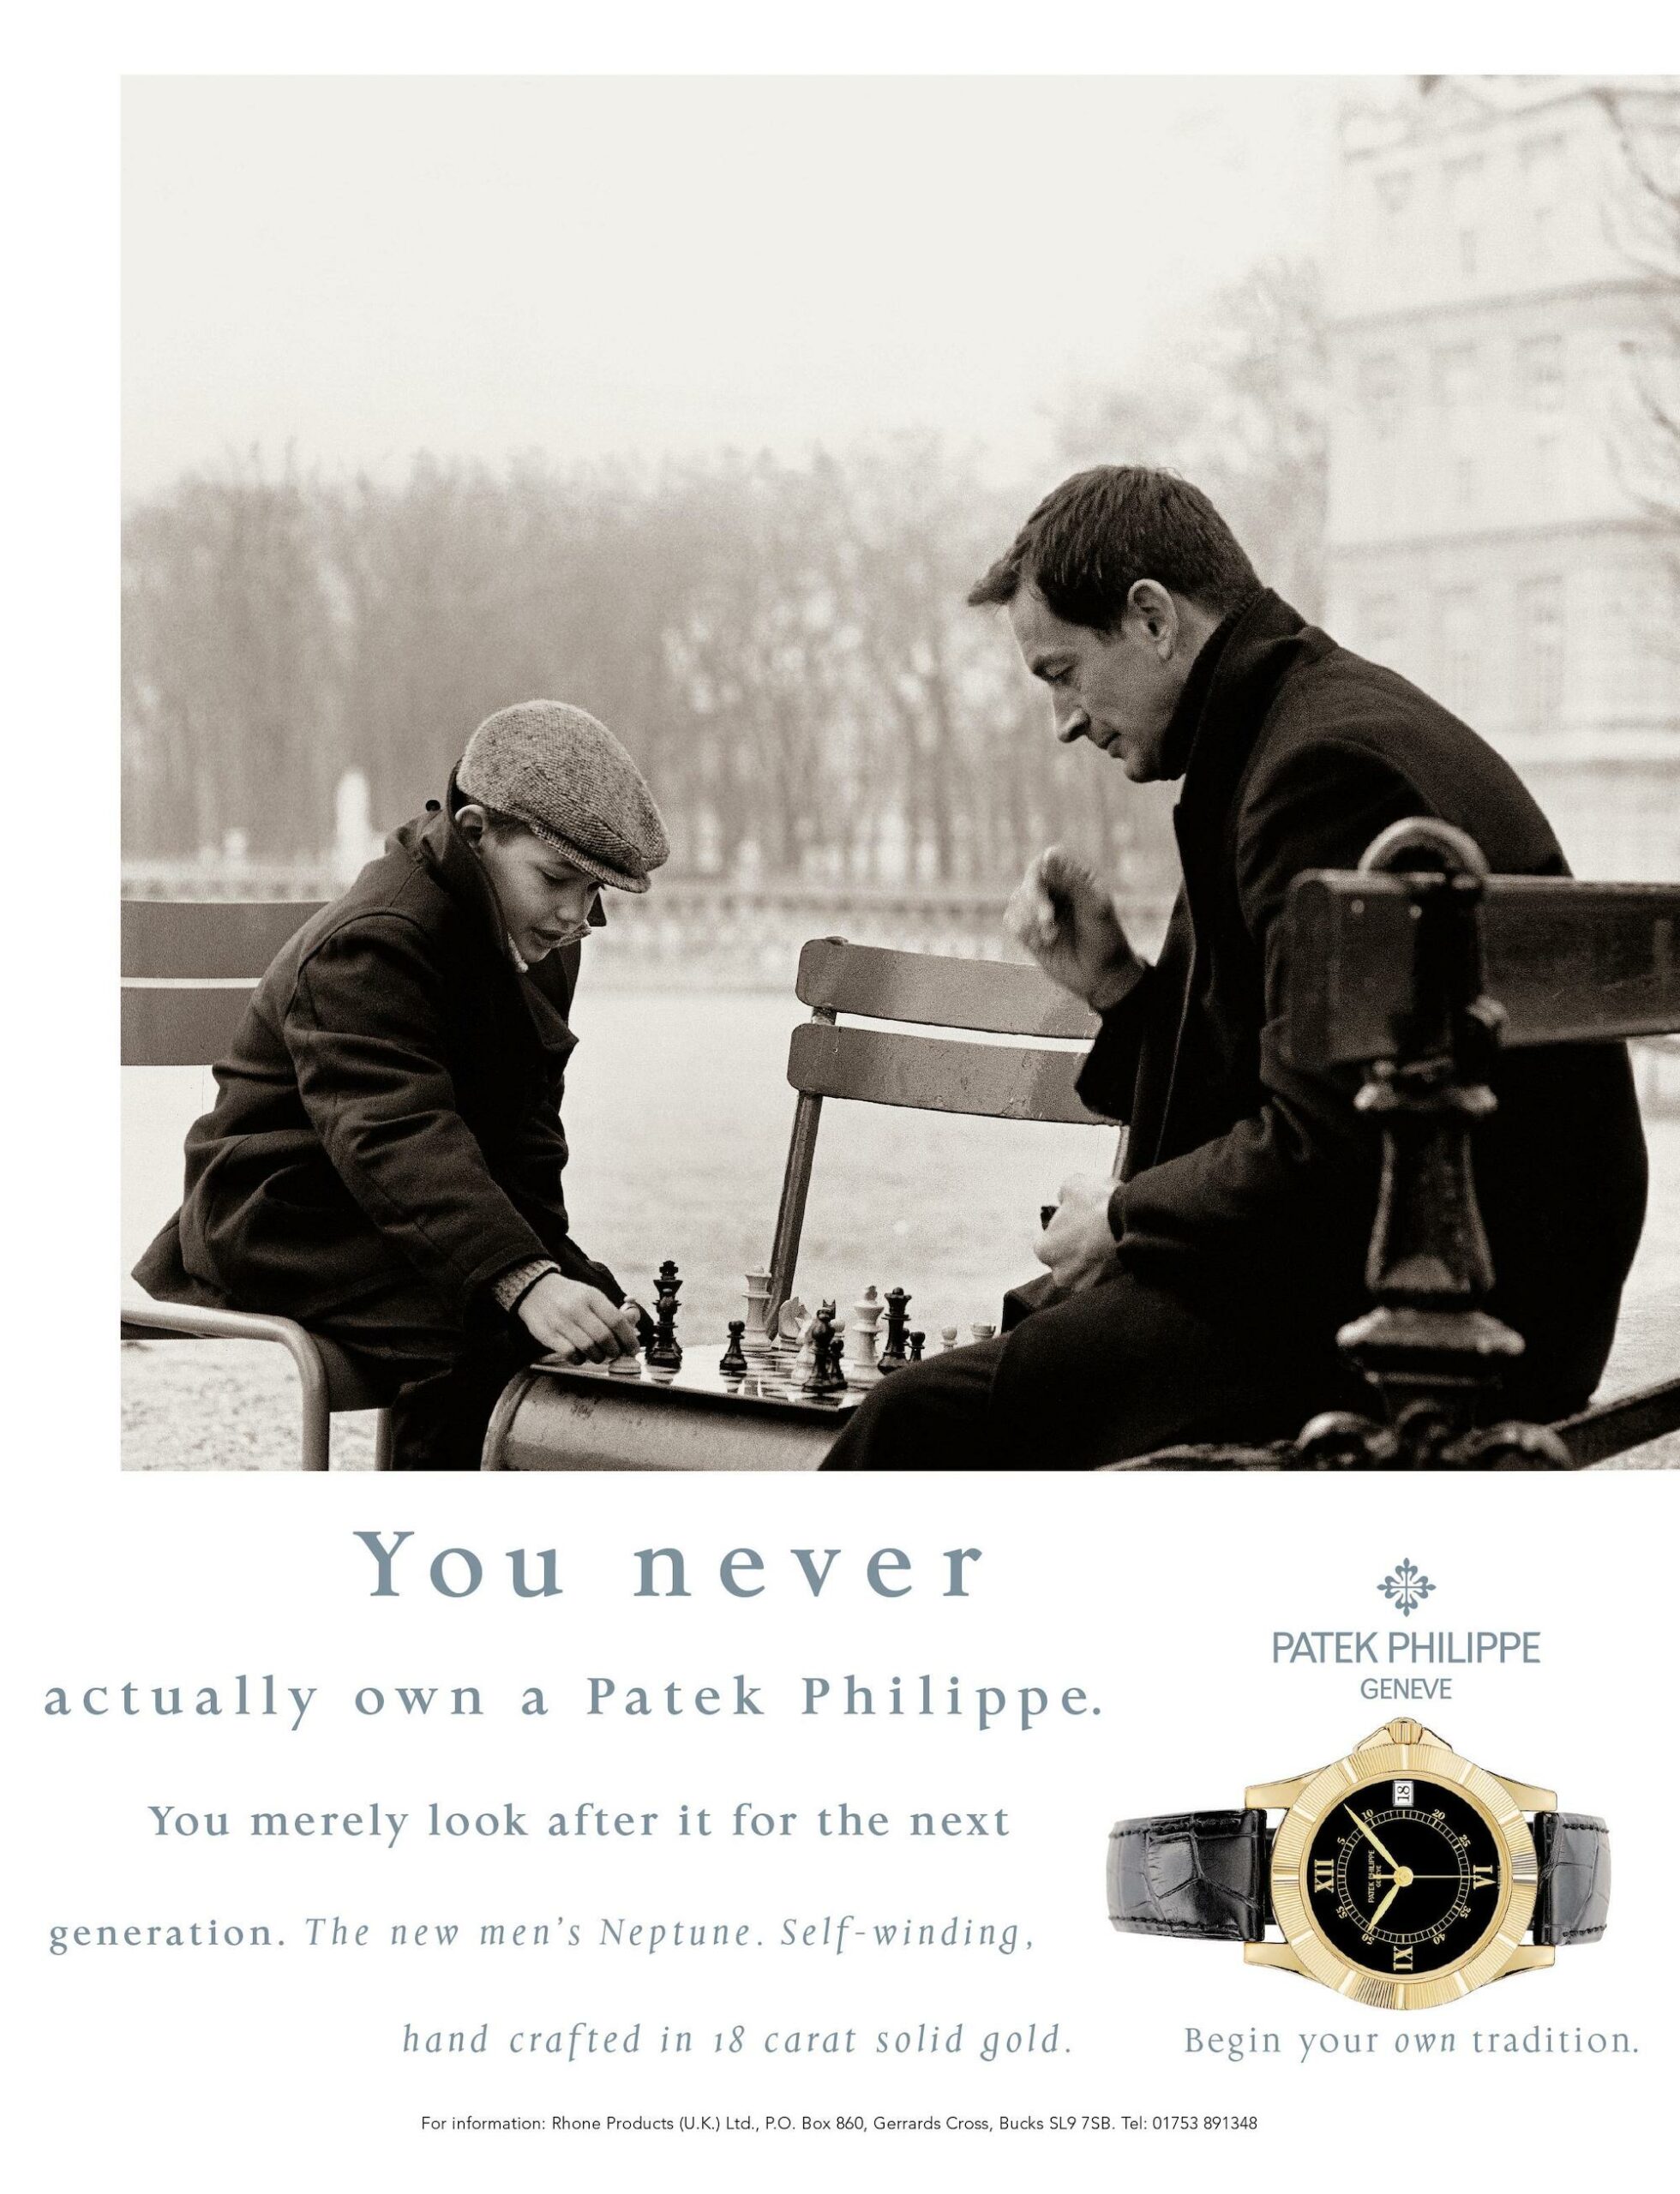 Patek Philippe: a family-owned company that has existed for generations